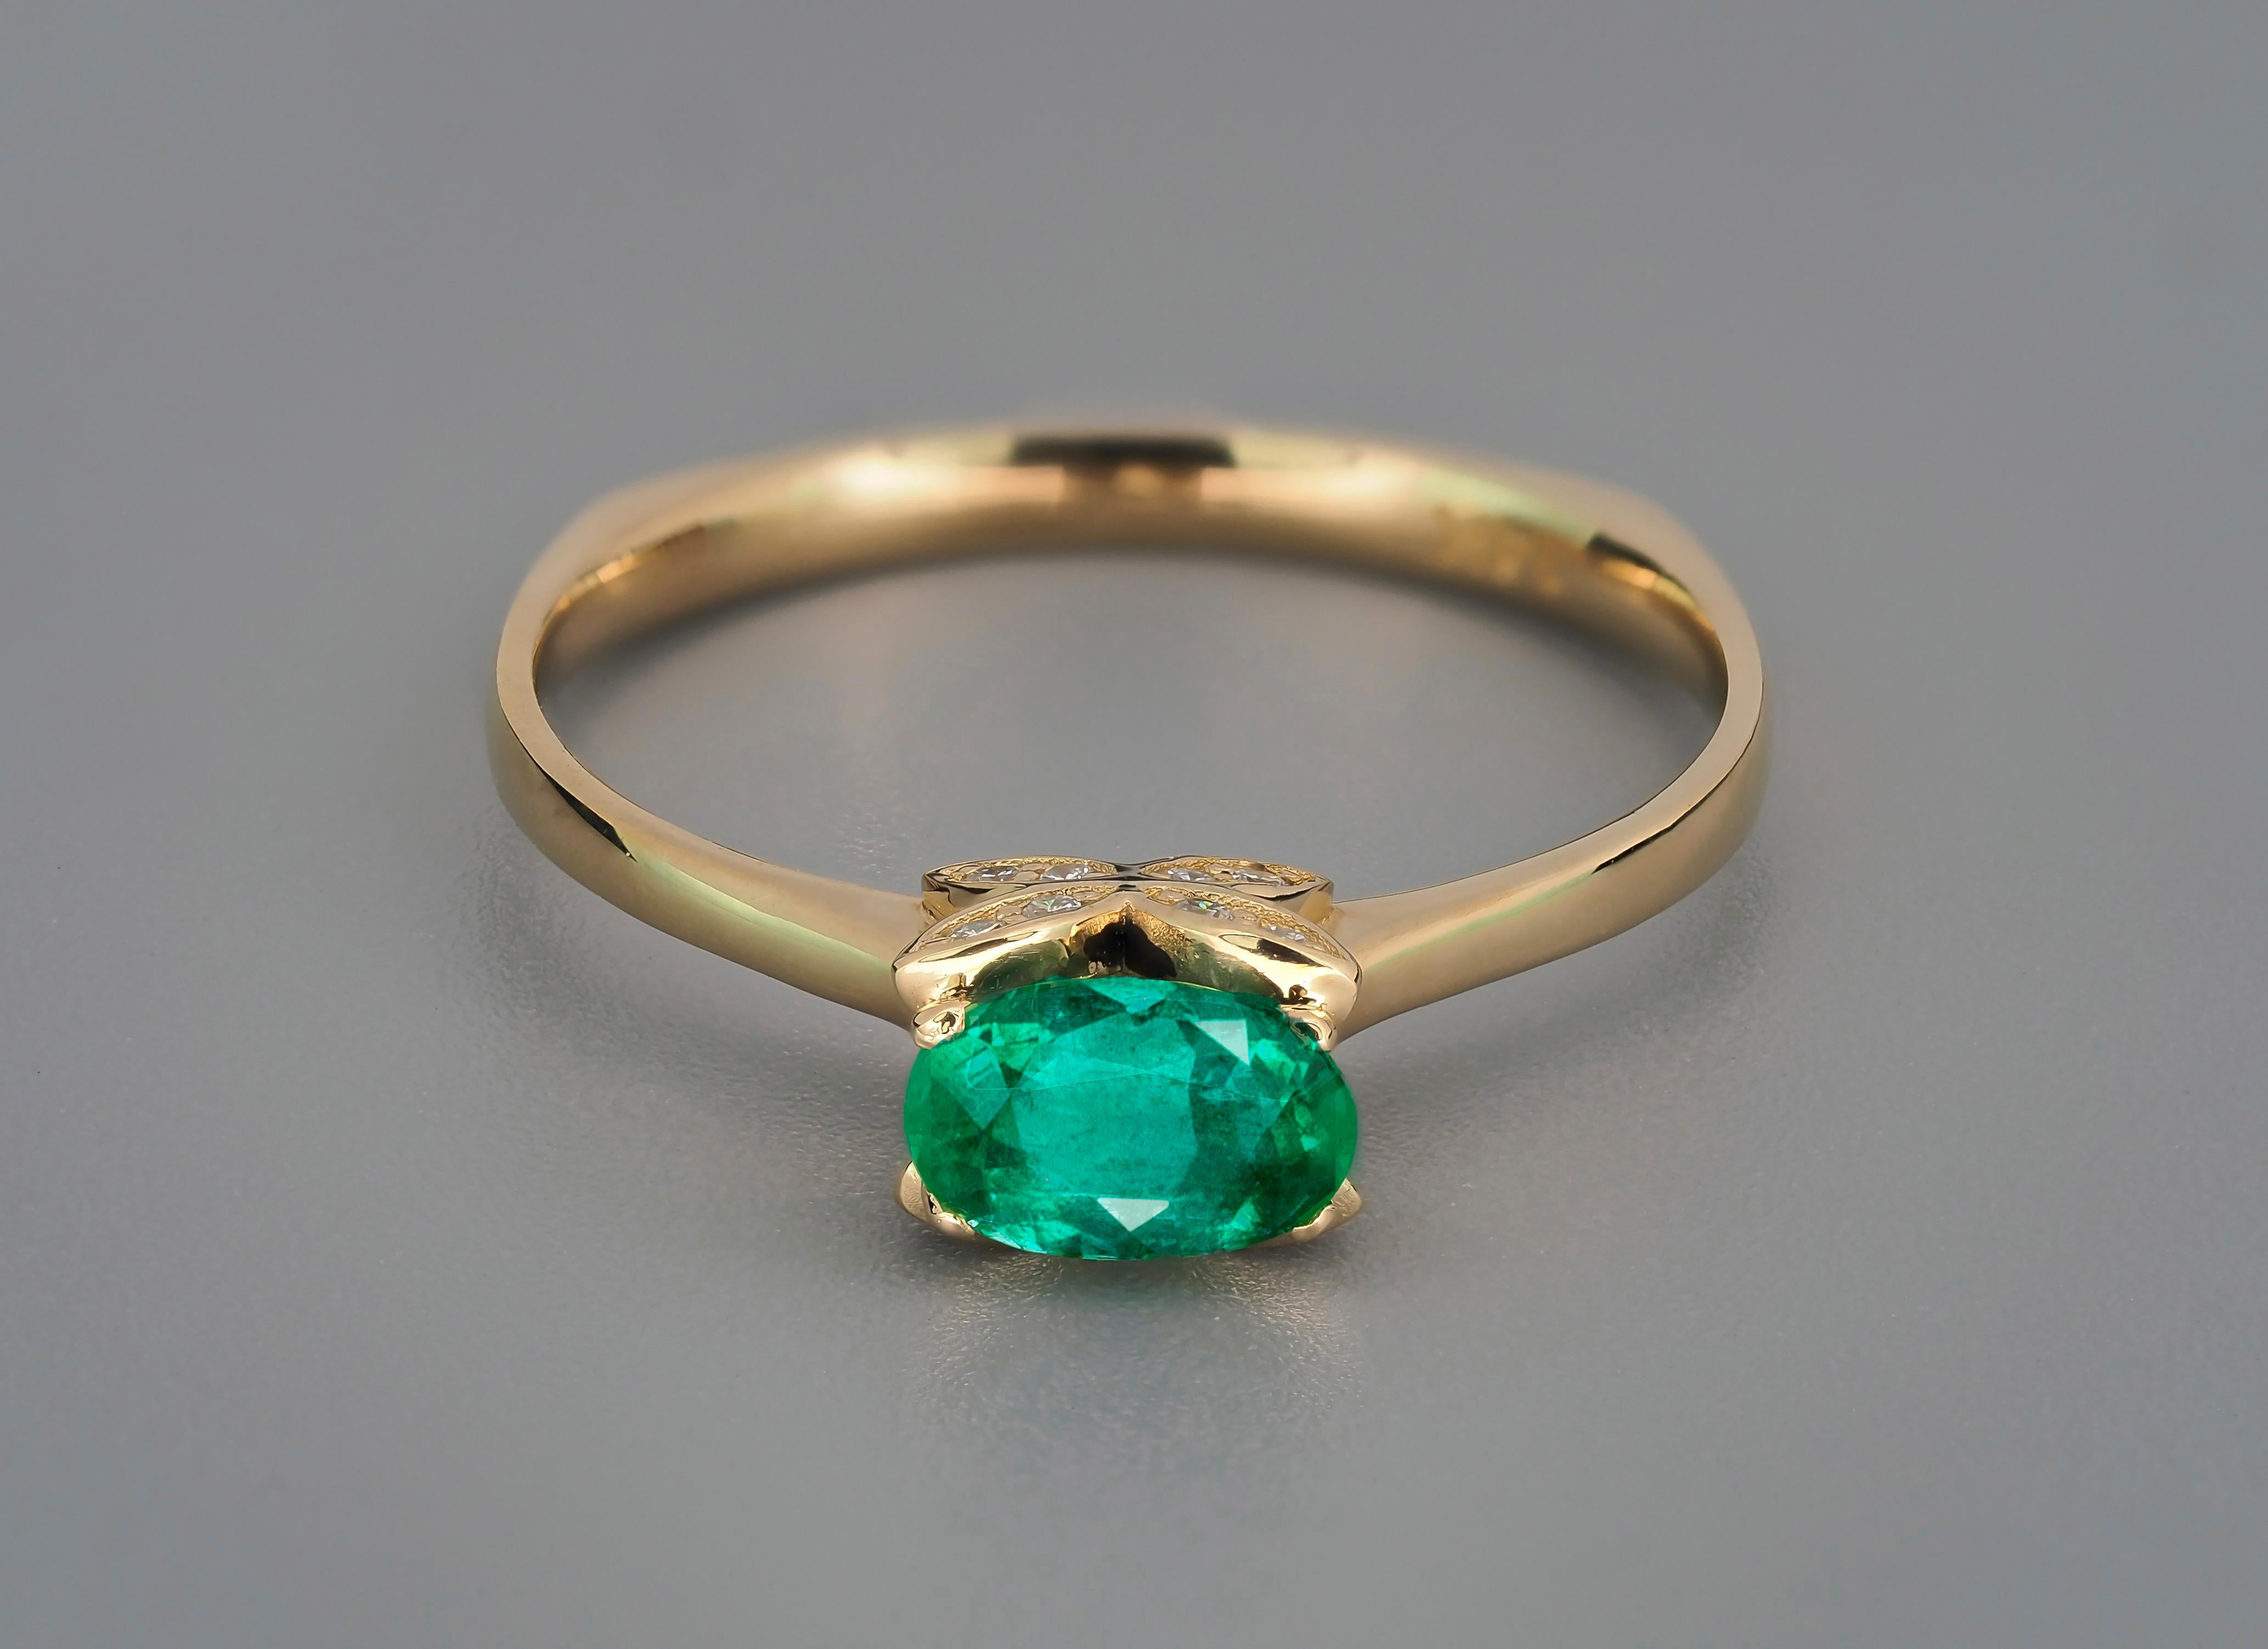 Butterfly design 14 kt gold ring with emerald and diamonds
Weight approx. 1.9 g.
Set with emerald, color - green
Oval cut, 0.80 ct. 
Clarity: Transparent with inclusions (emerald garden)
Surrounding stone - diamonds (F/VS), round brilliant cut,